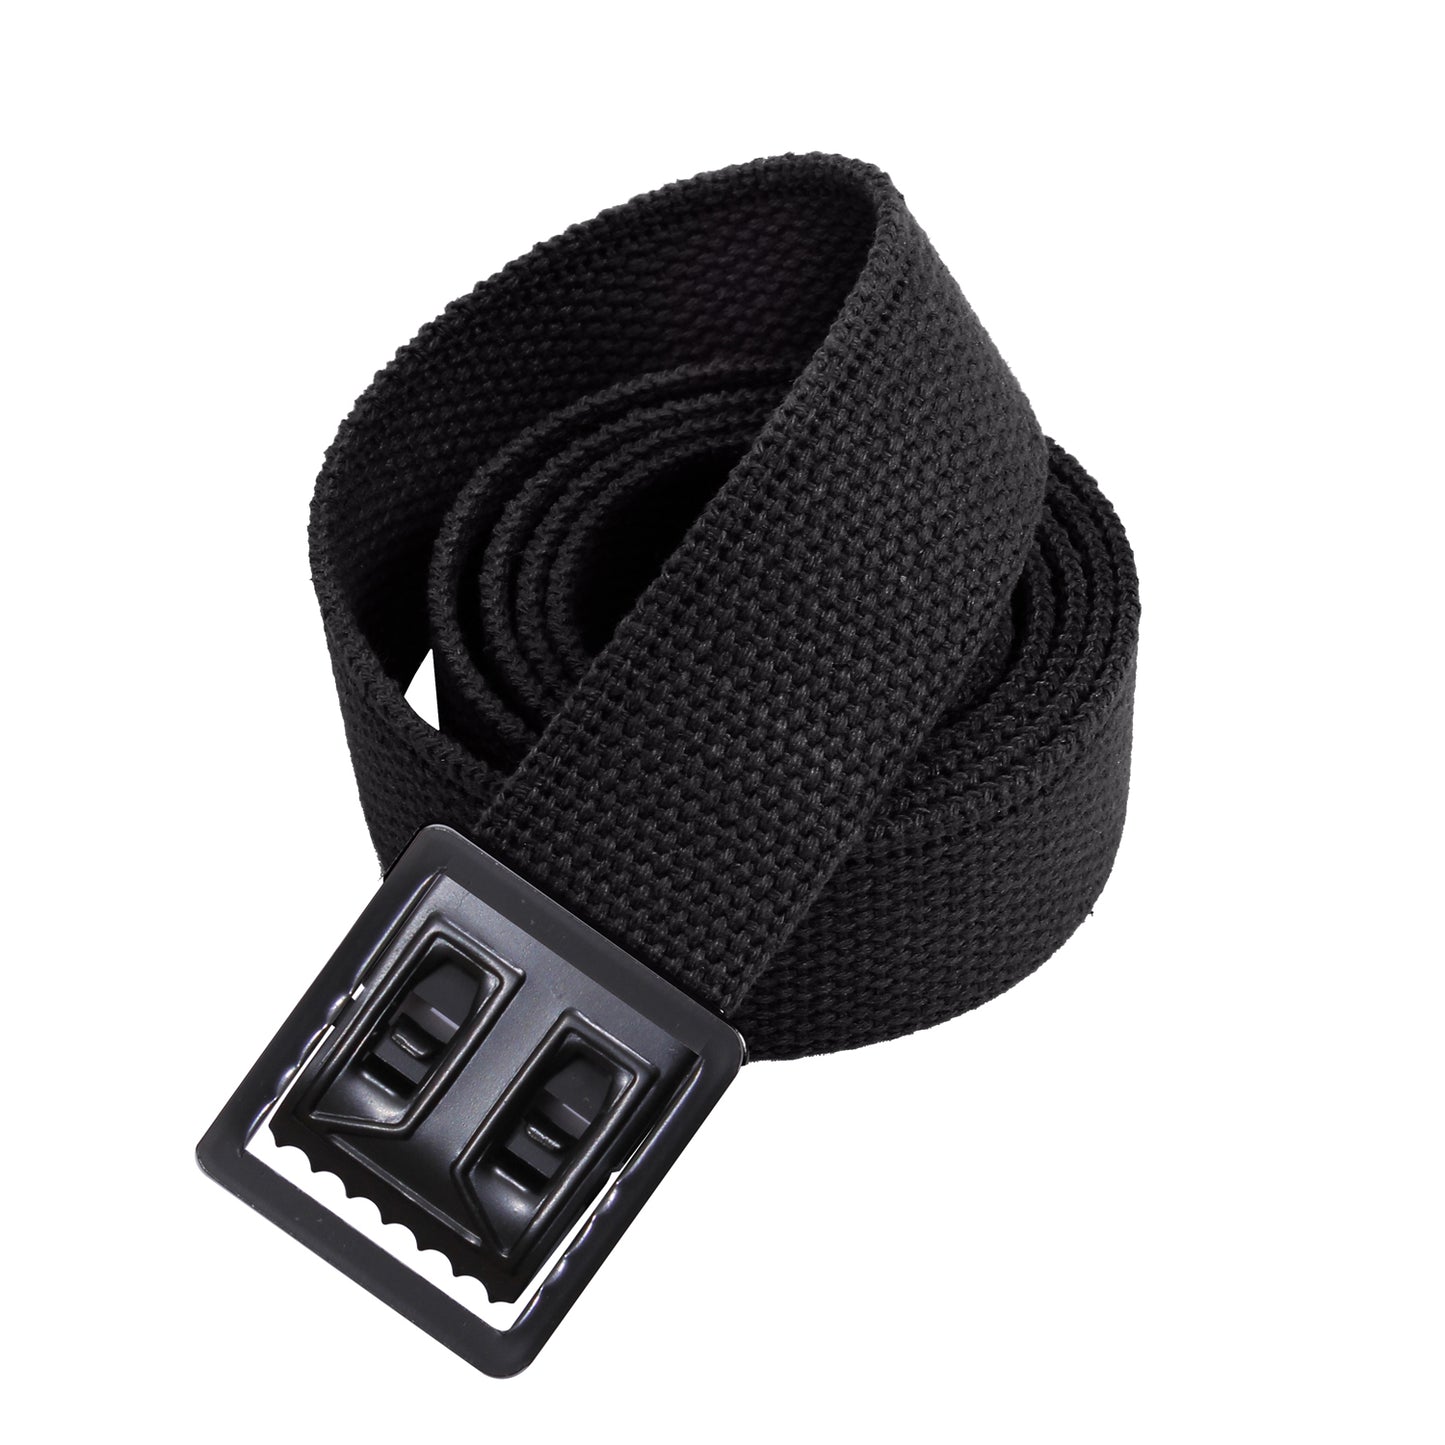 72 Inches Black Belt With Open Face Black Buckle Extra Long Unisx